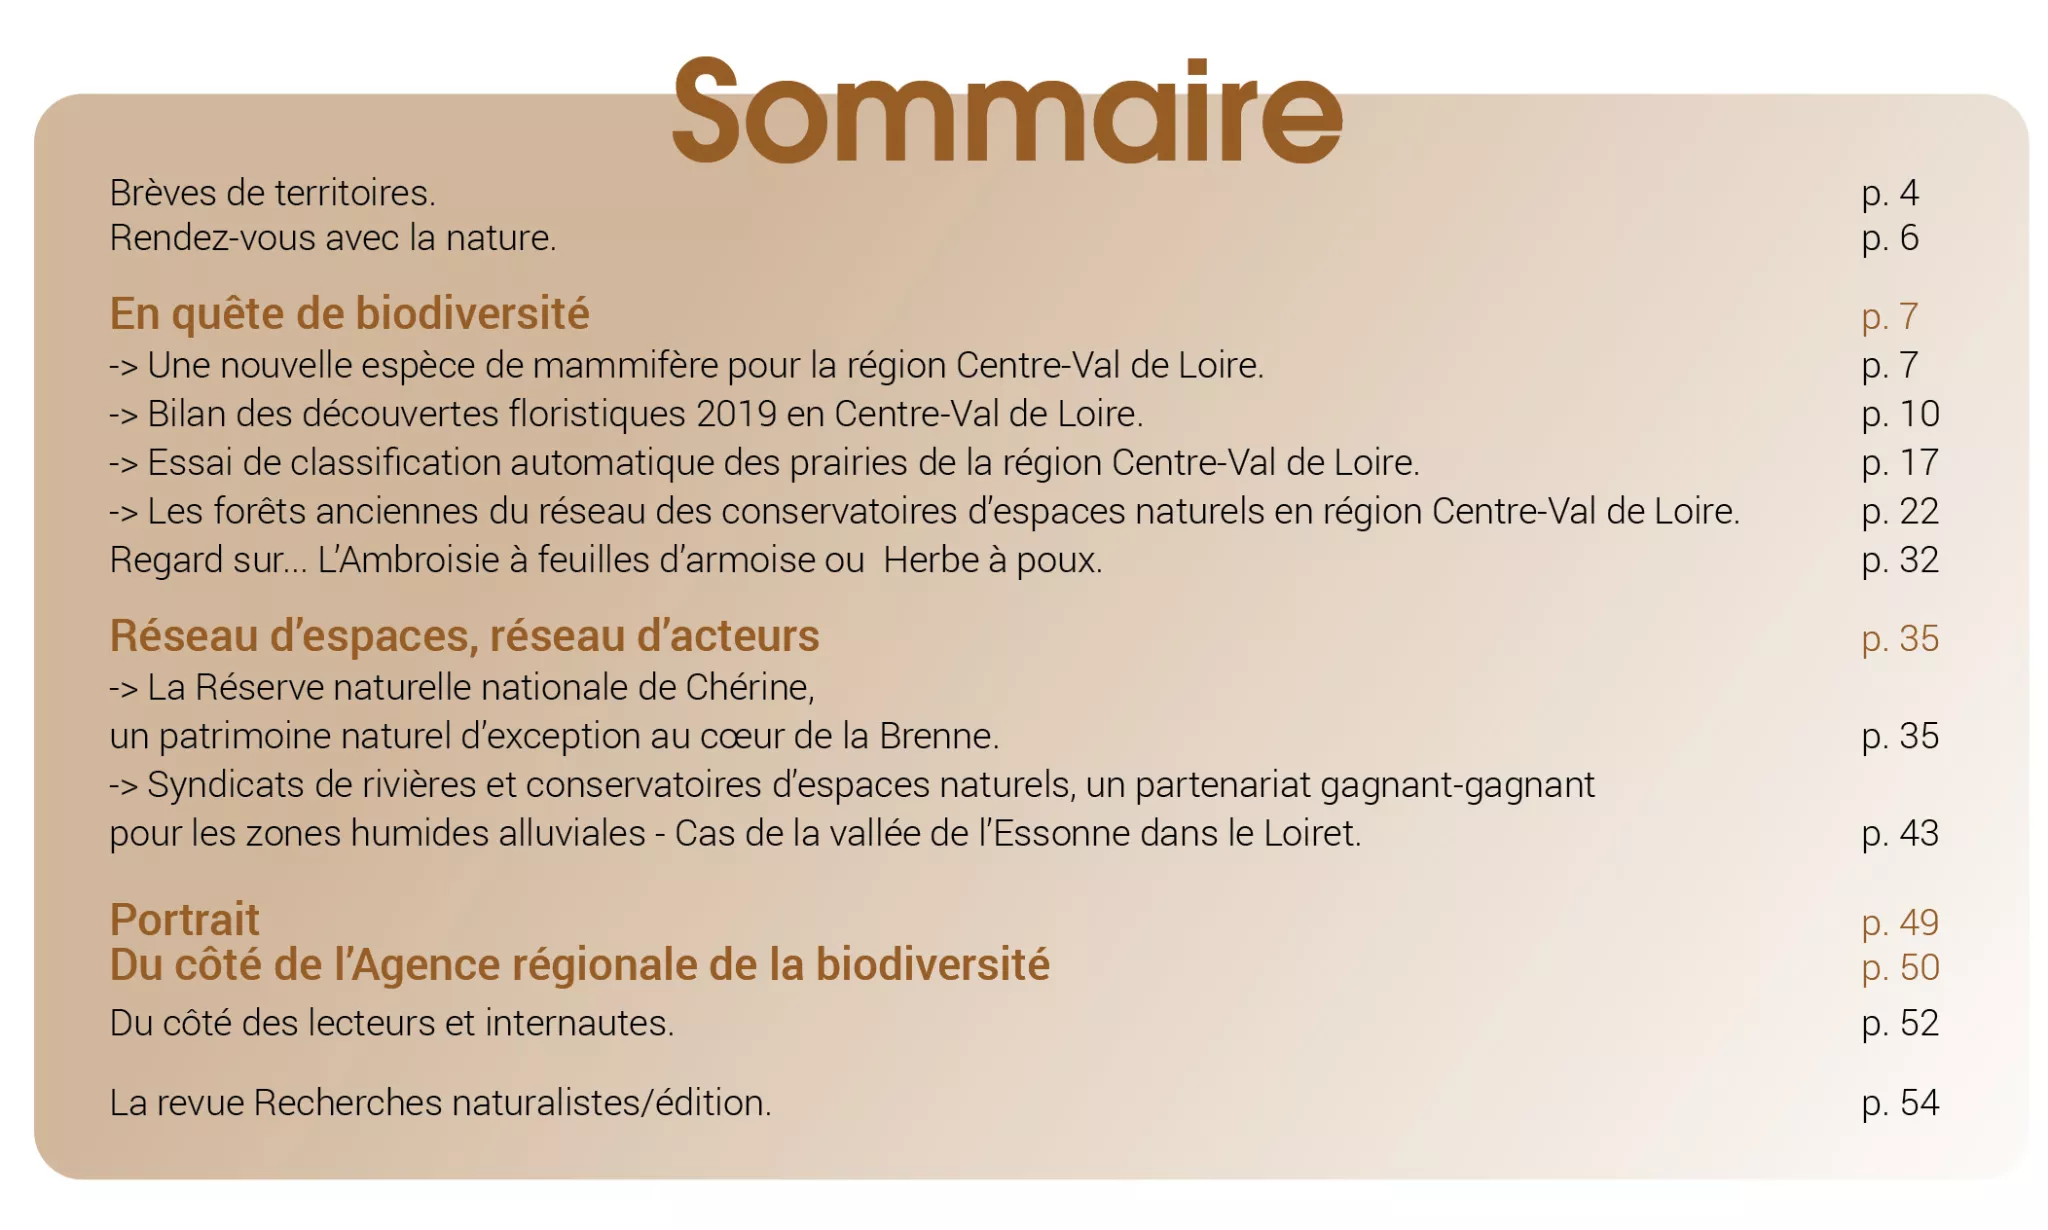 Sommaire RN 10